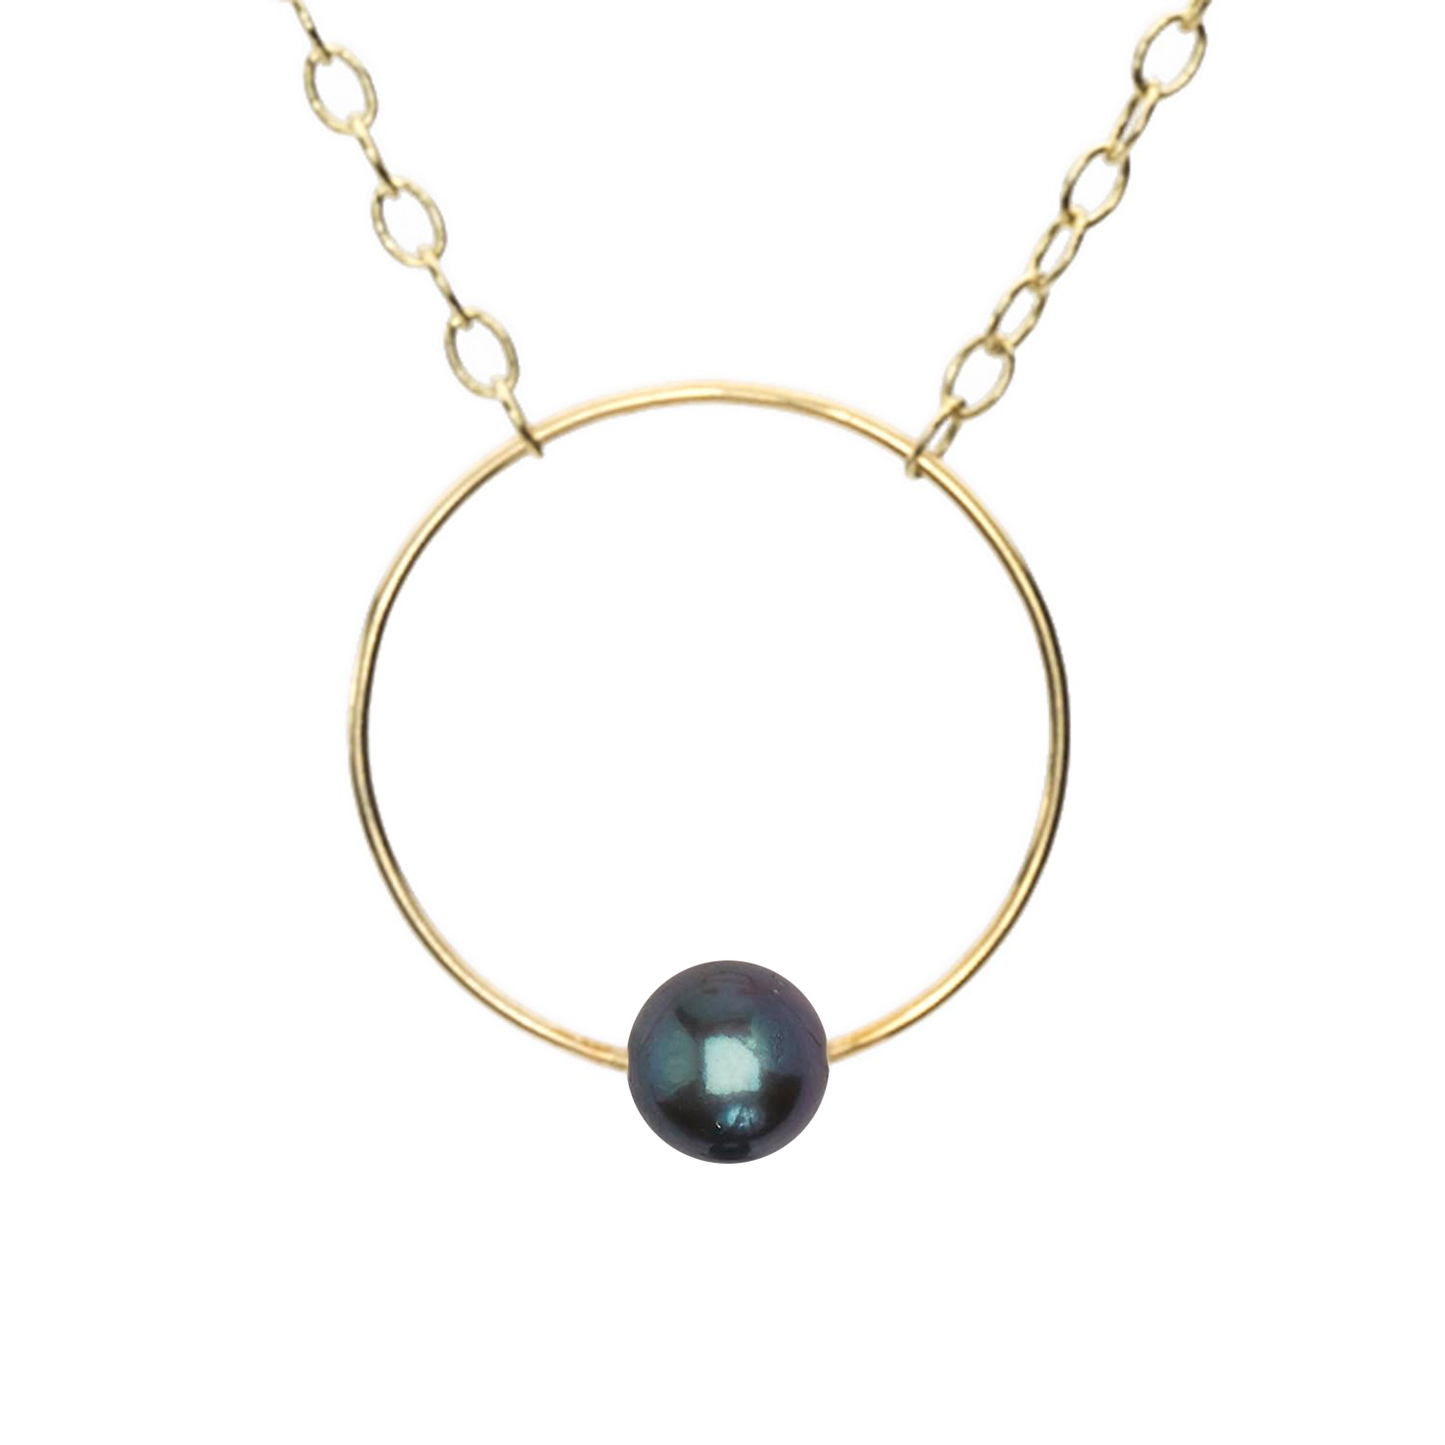 Petite Circle Pendant Necklace with Round Freshwater Pearl